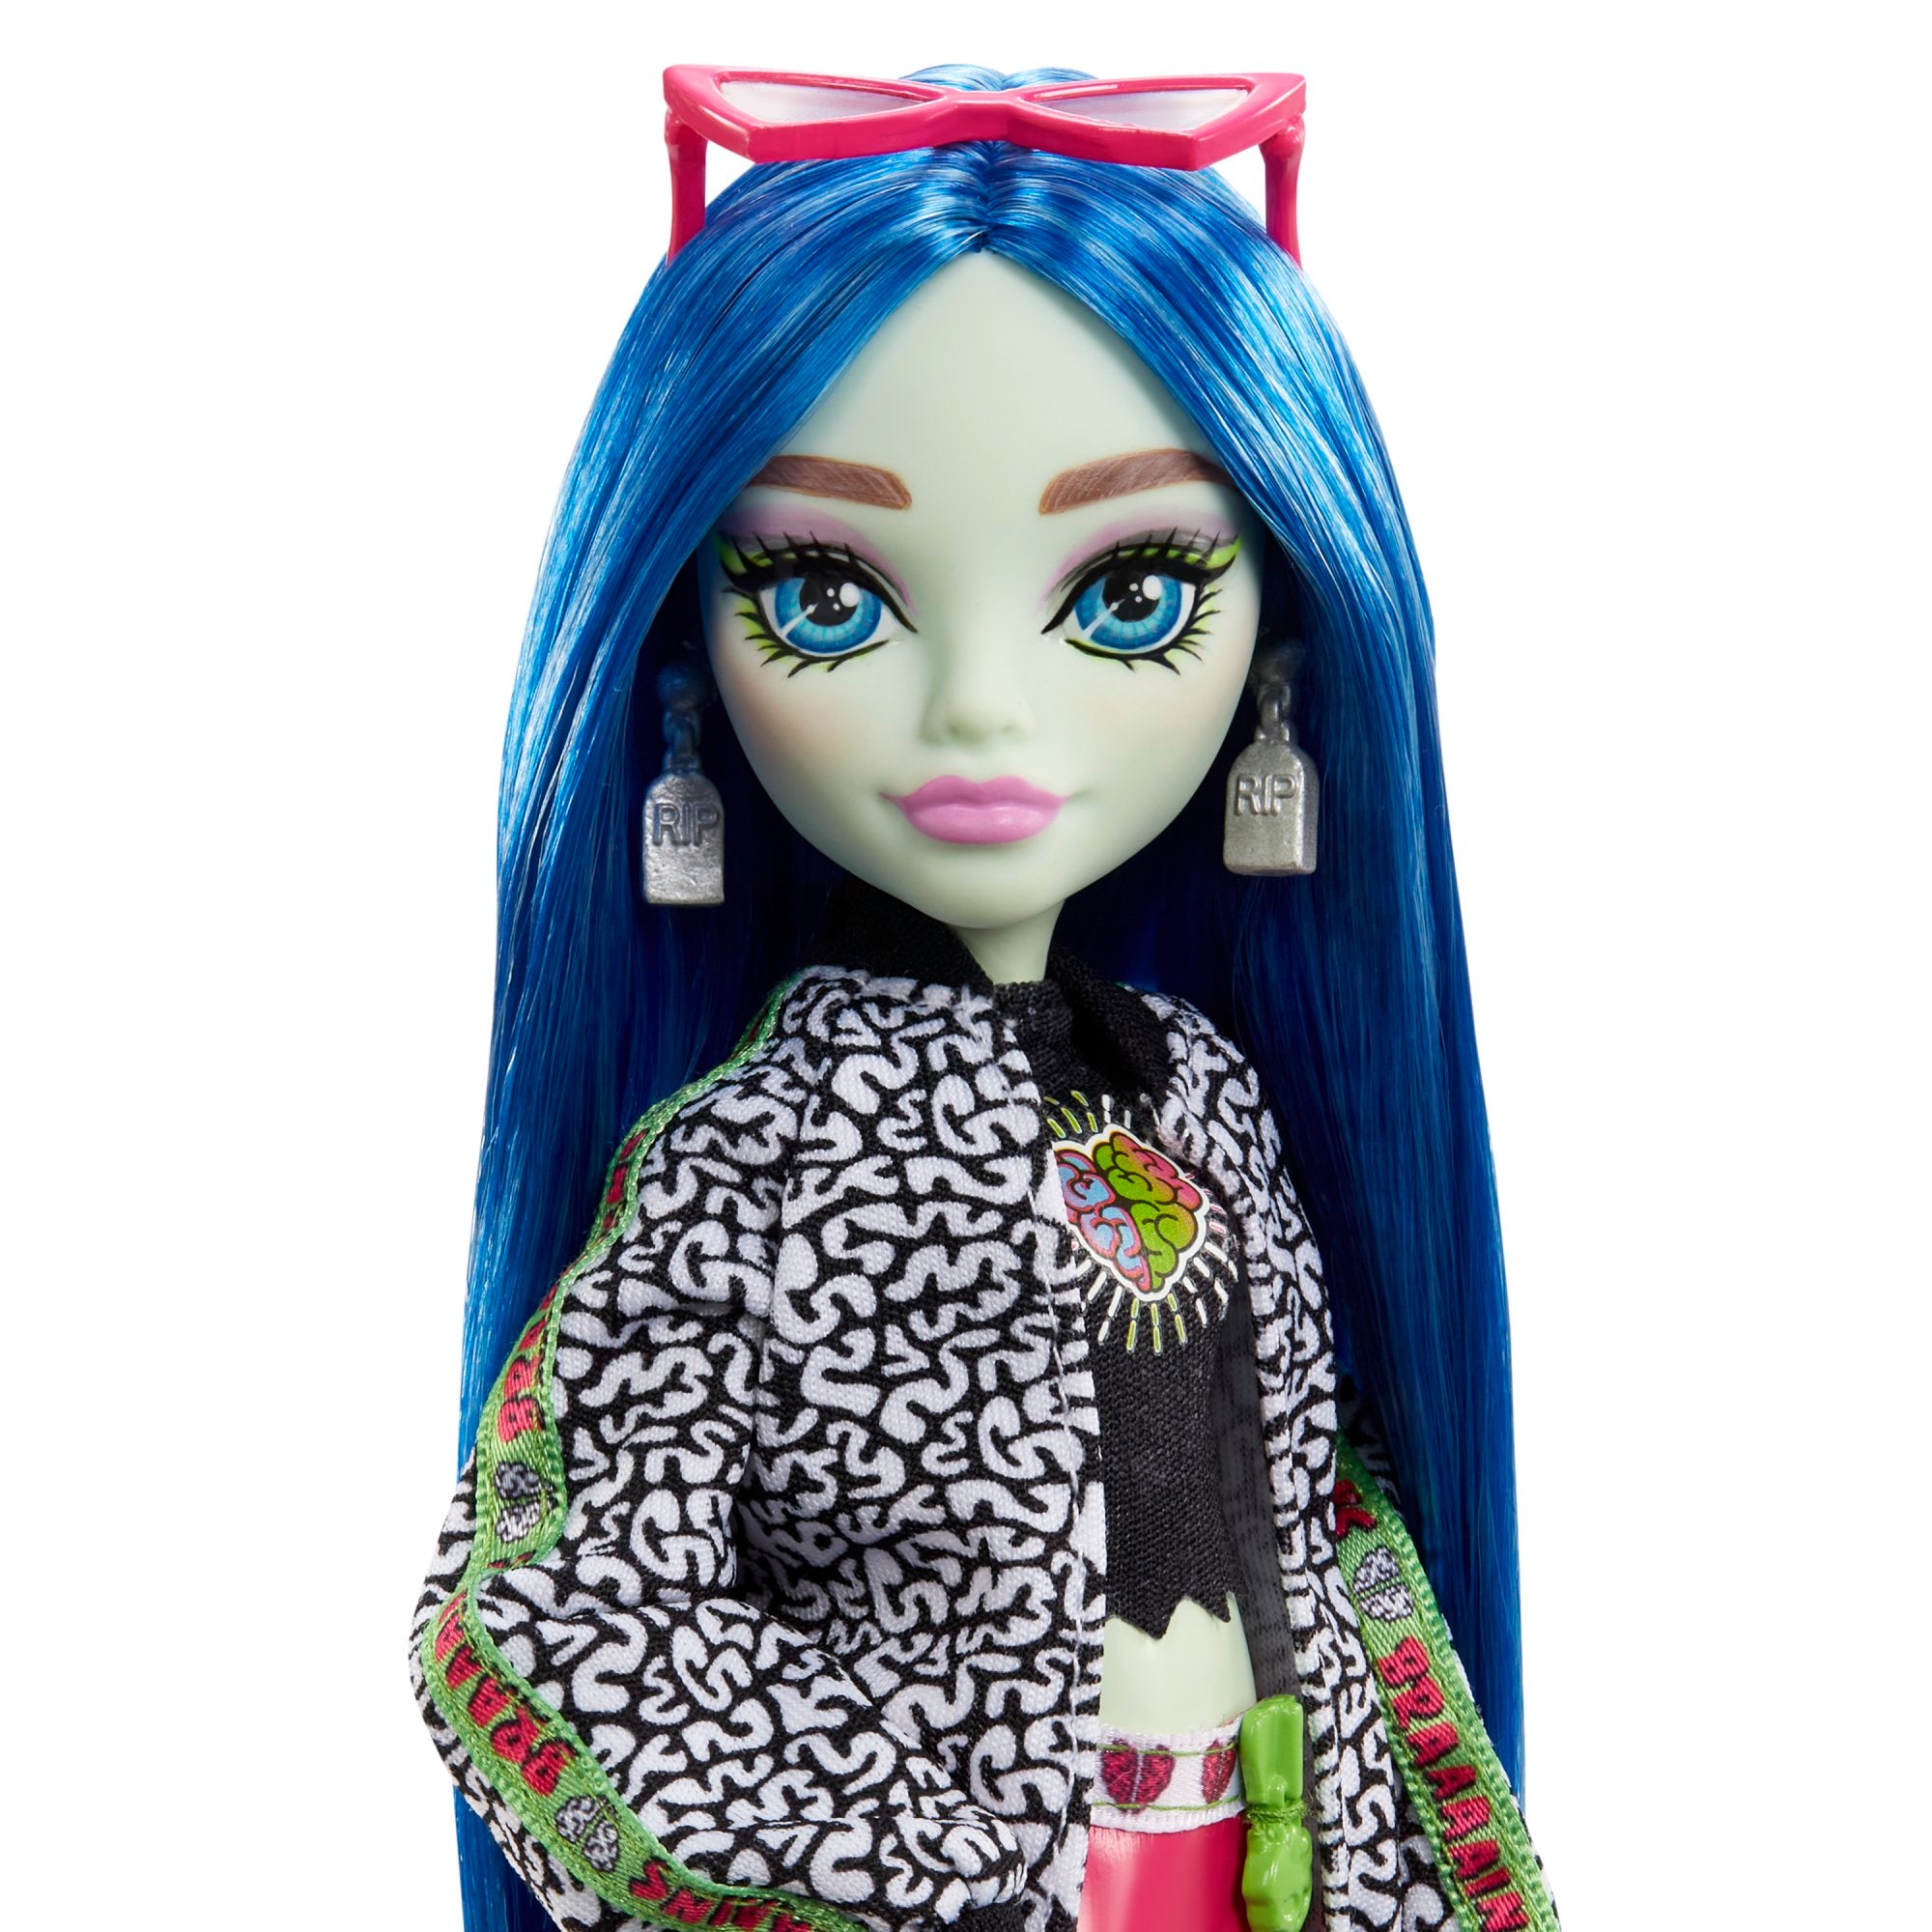 A Gift From The New Surprise Doll Monster High Dolls G3 Abbey